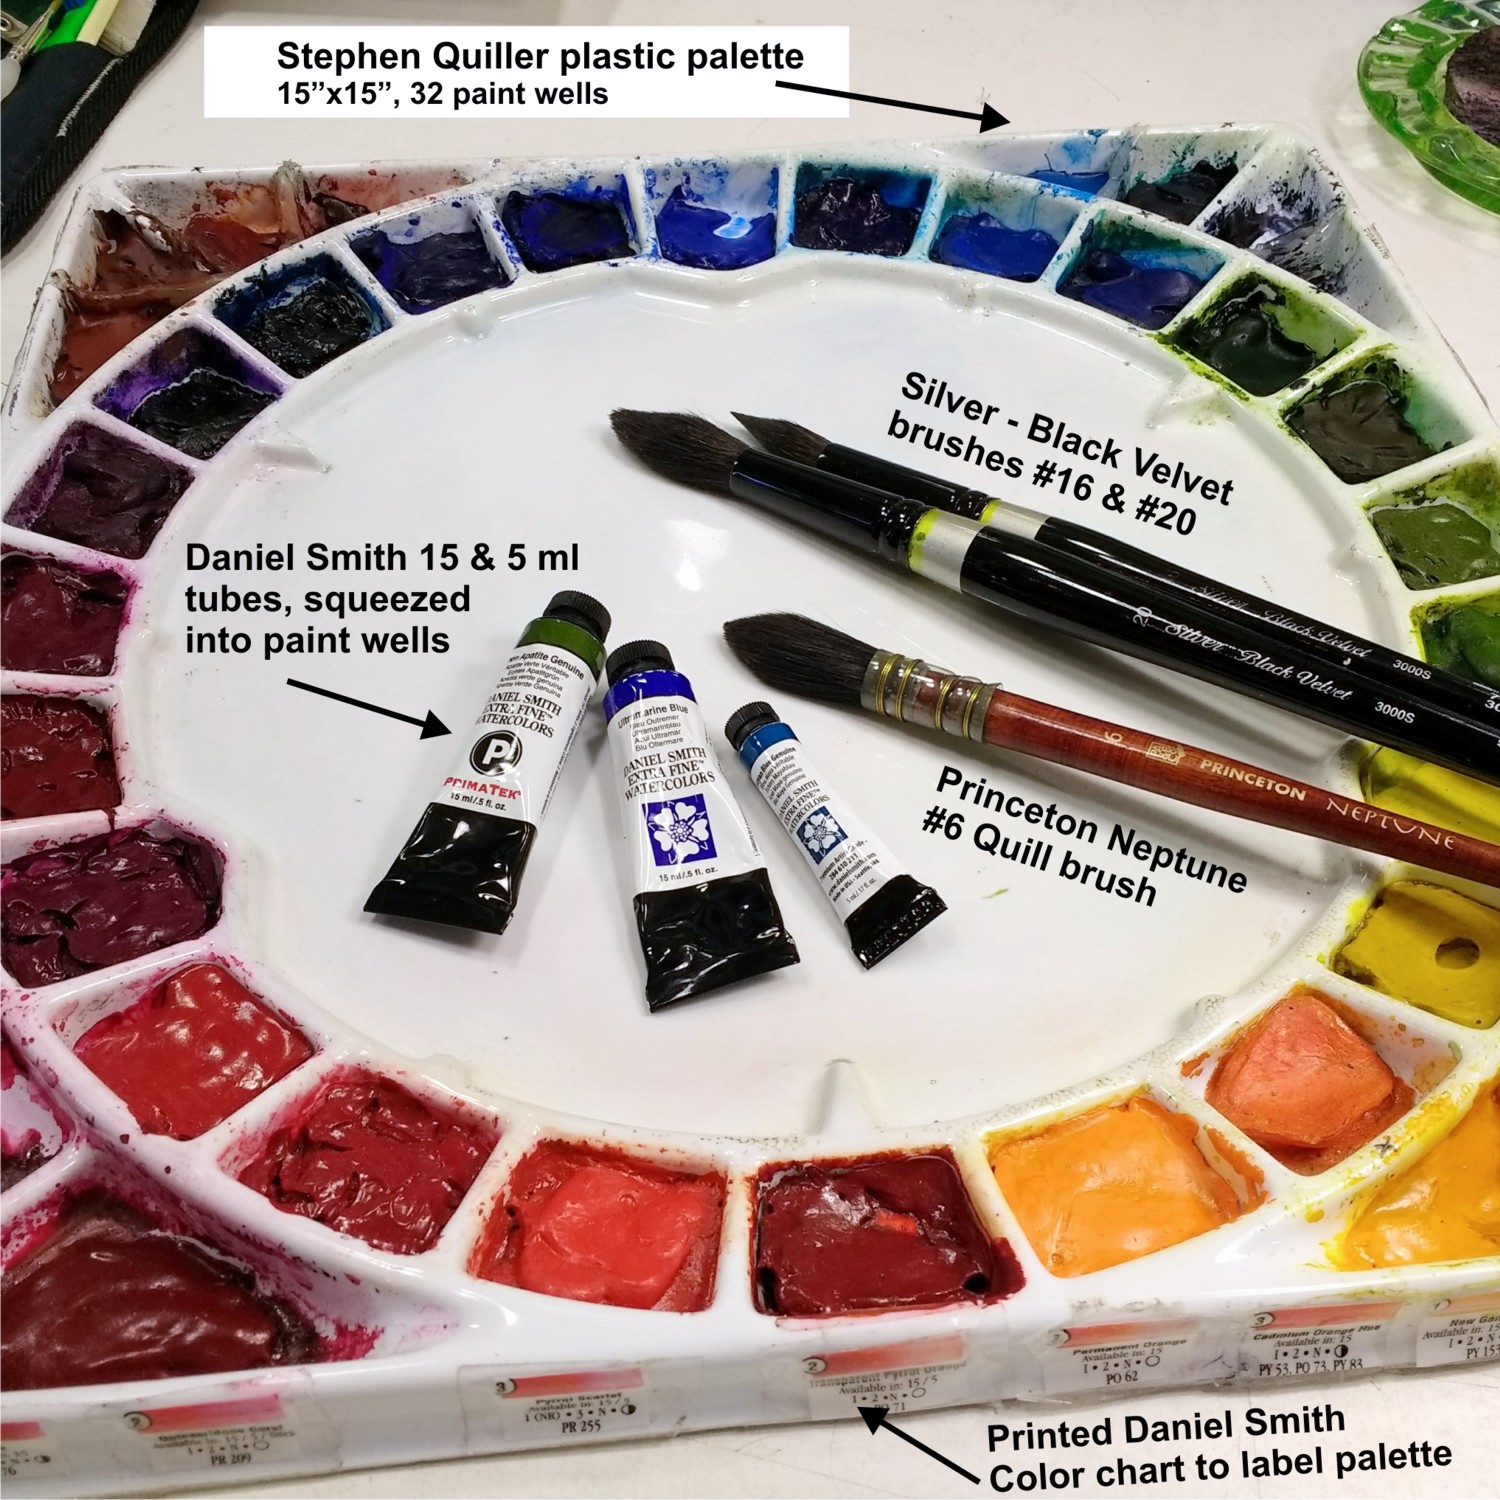 Watercolor Art Journaling 101: The Essential Supply List — A